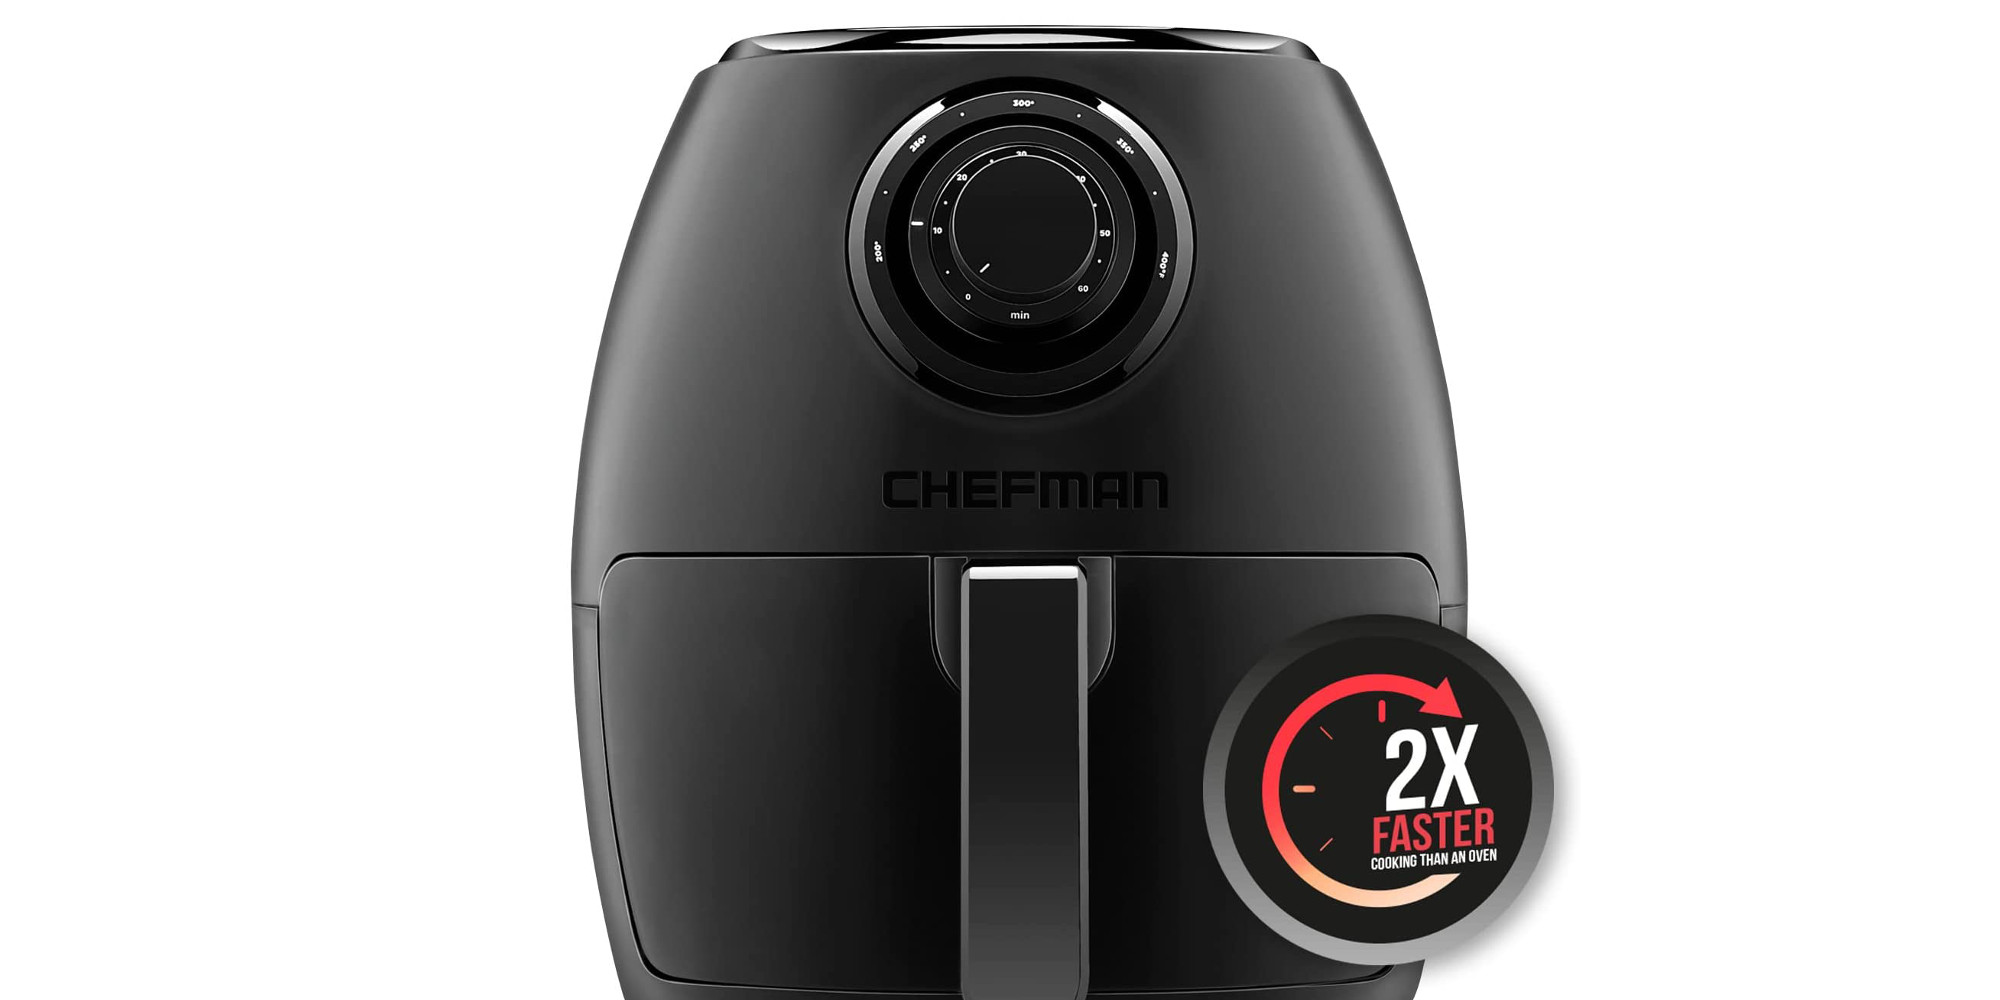 https://9to5toys.com/wp-content/uploads/sites/5/2022/02/Chefman-TurboFry-Air-Fryer.jpg